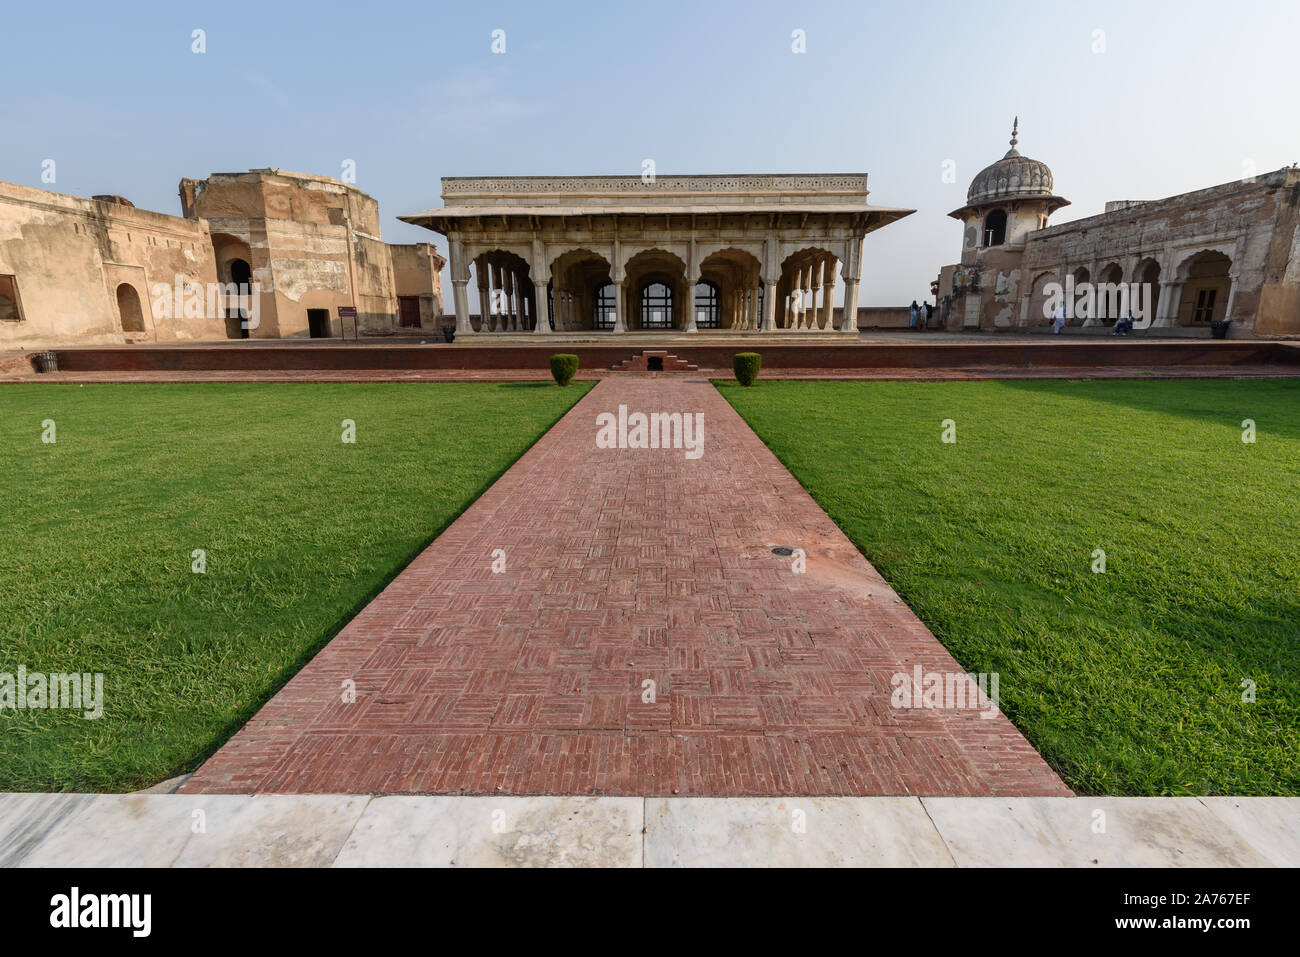 LAHORE, PAKISTAN-SEP 23, 2019: Diwan e Khas is  the place where the Mughal emperor received courtiers and state guests located inside lahore fort in L Stock Photo